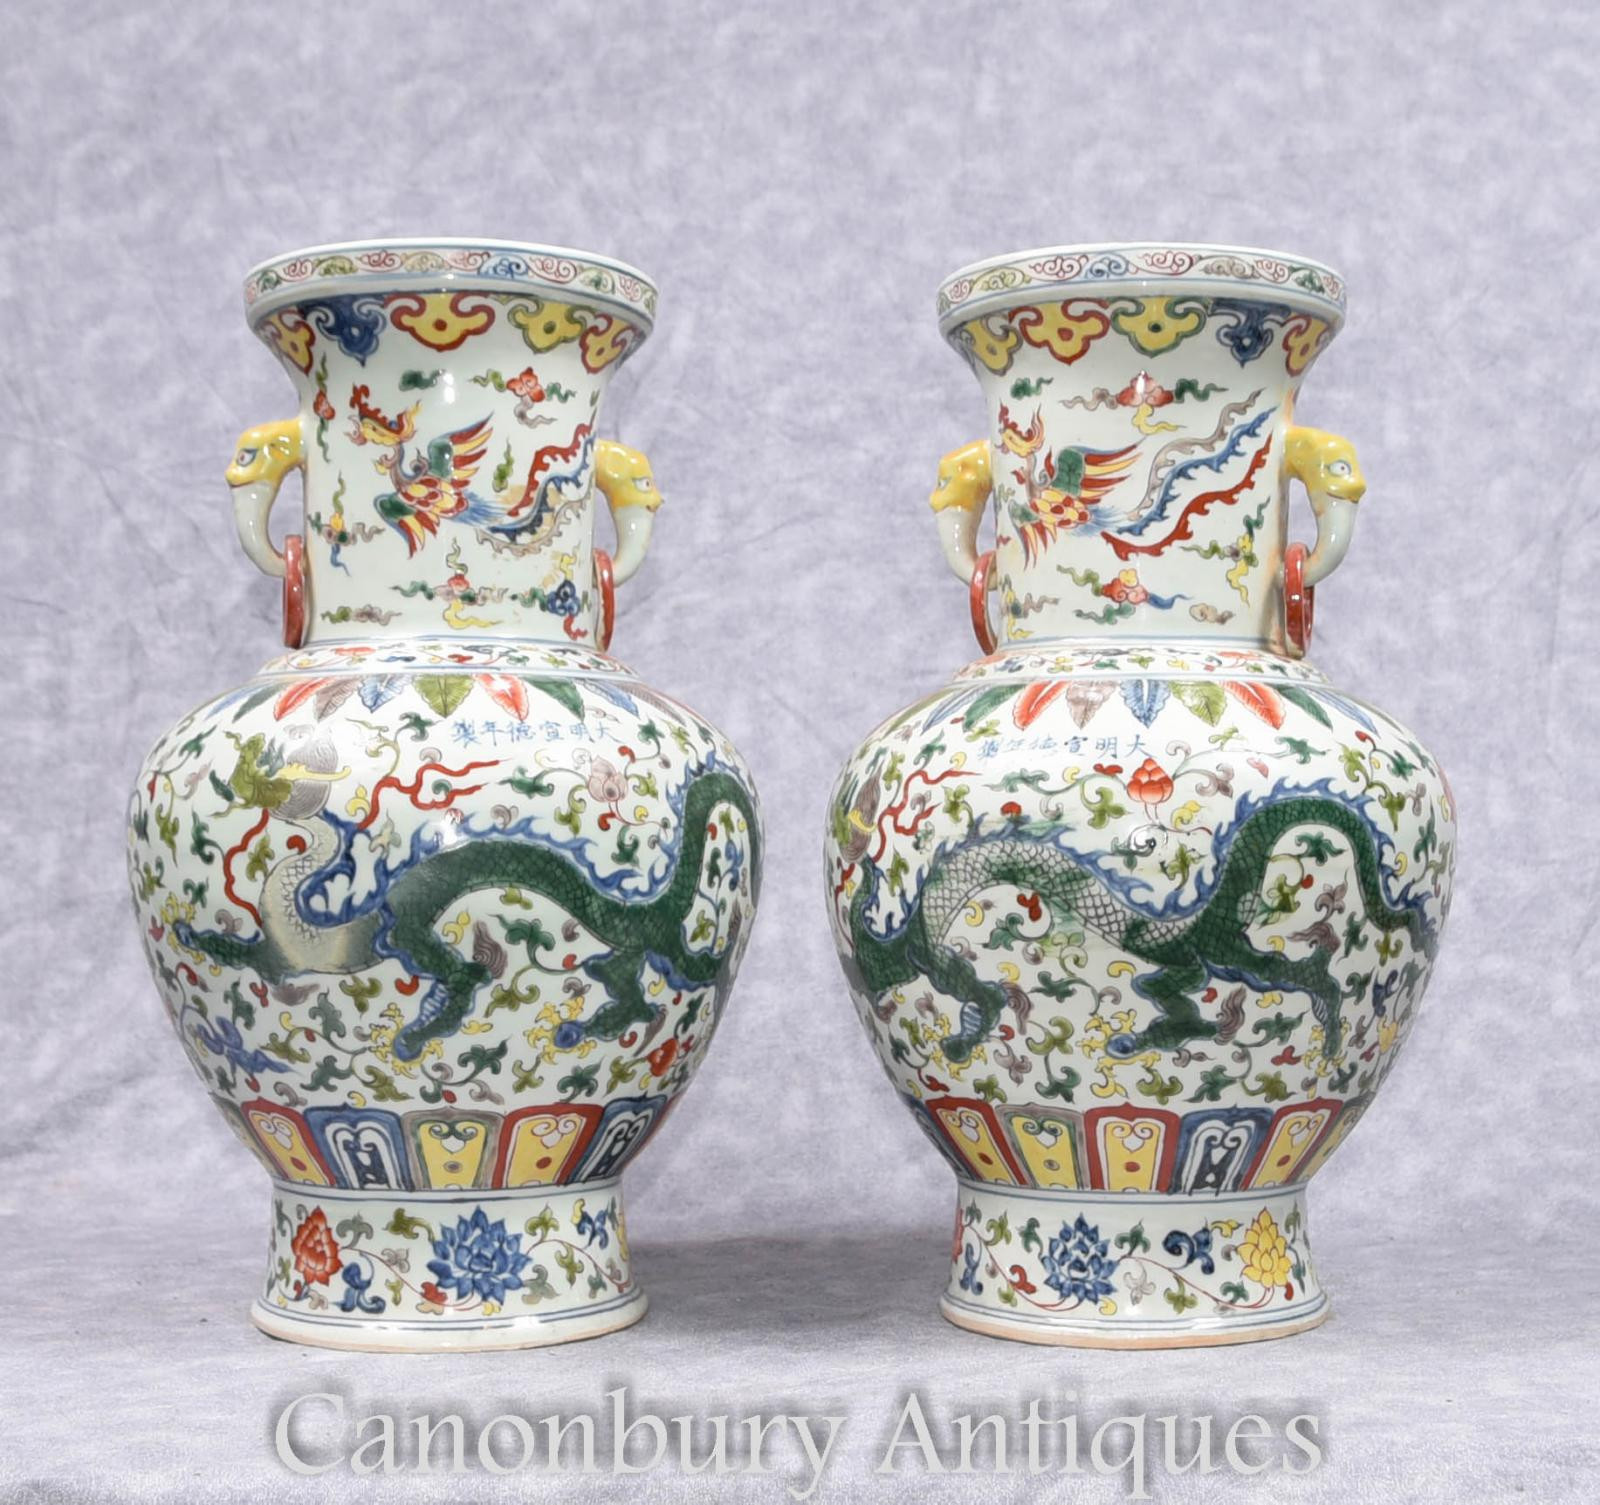 25 Cute Antique Chinese Pottery Vases 2024 free download antique chinese pottery vases of pair chinese qianlong porcelain vases dragon urns ceramic china ebay with piece description gorgeous pair of chinese qianlong style porcelain vases